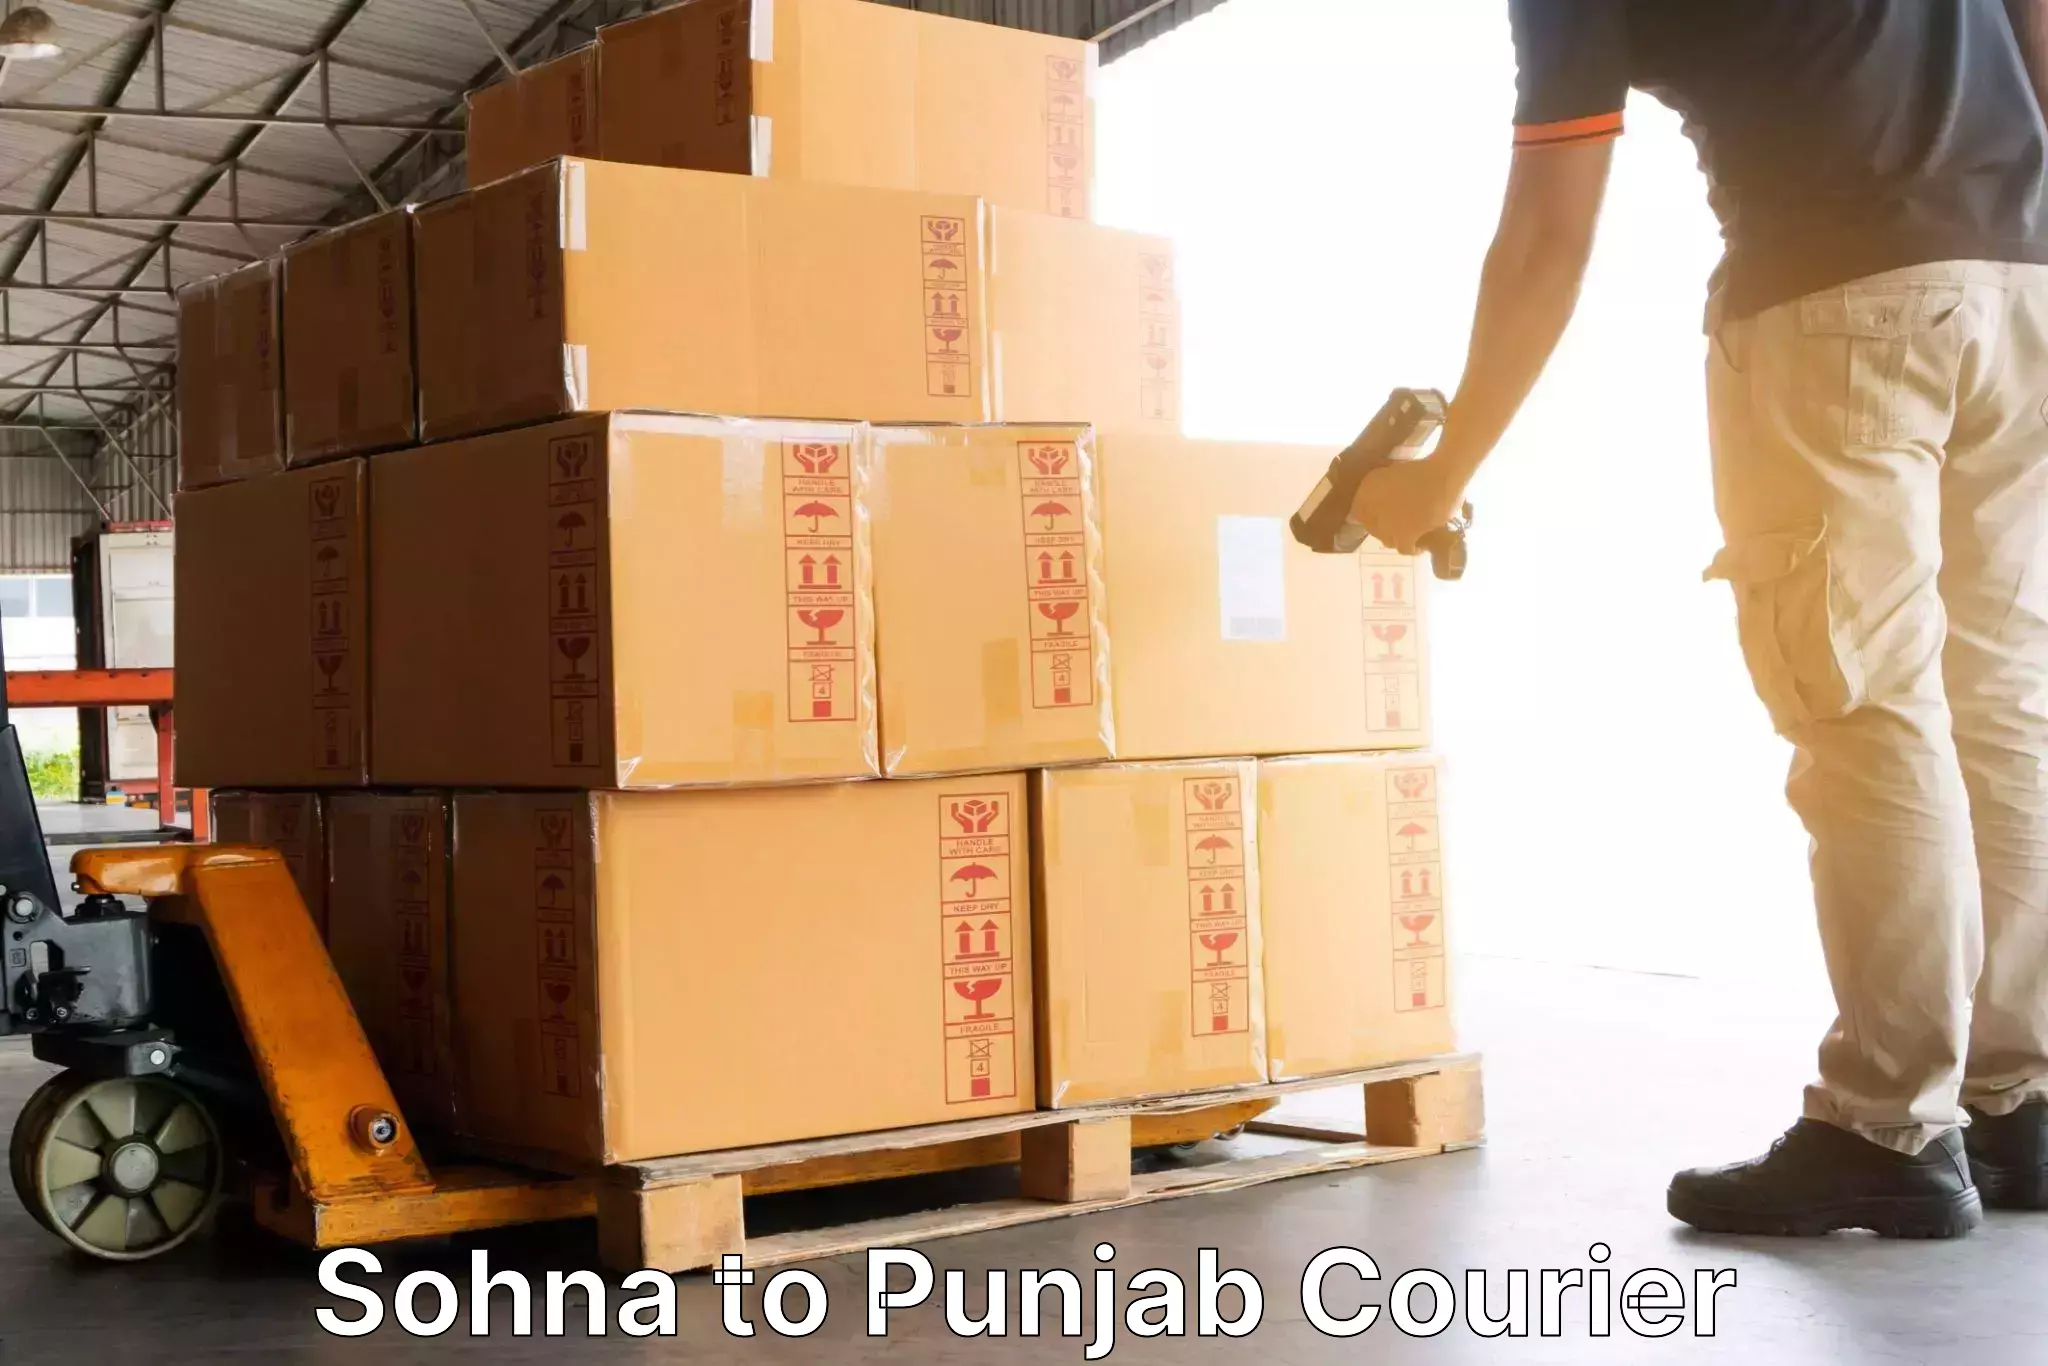 Express delivery capabilities Sohna to Abohar